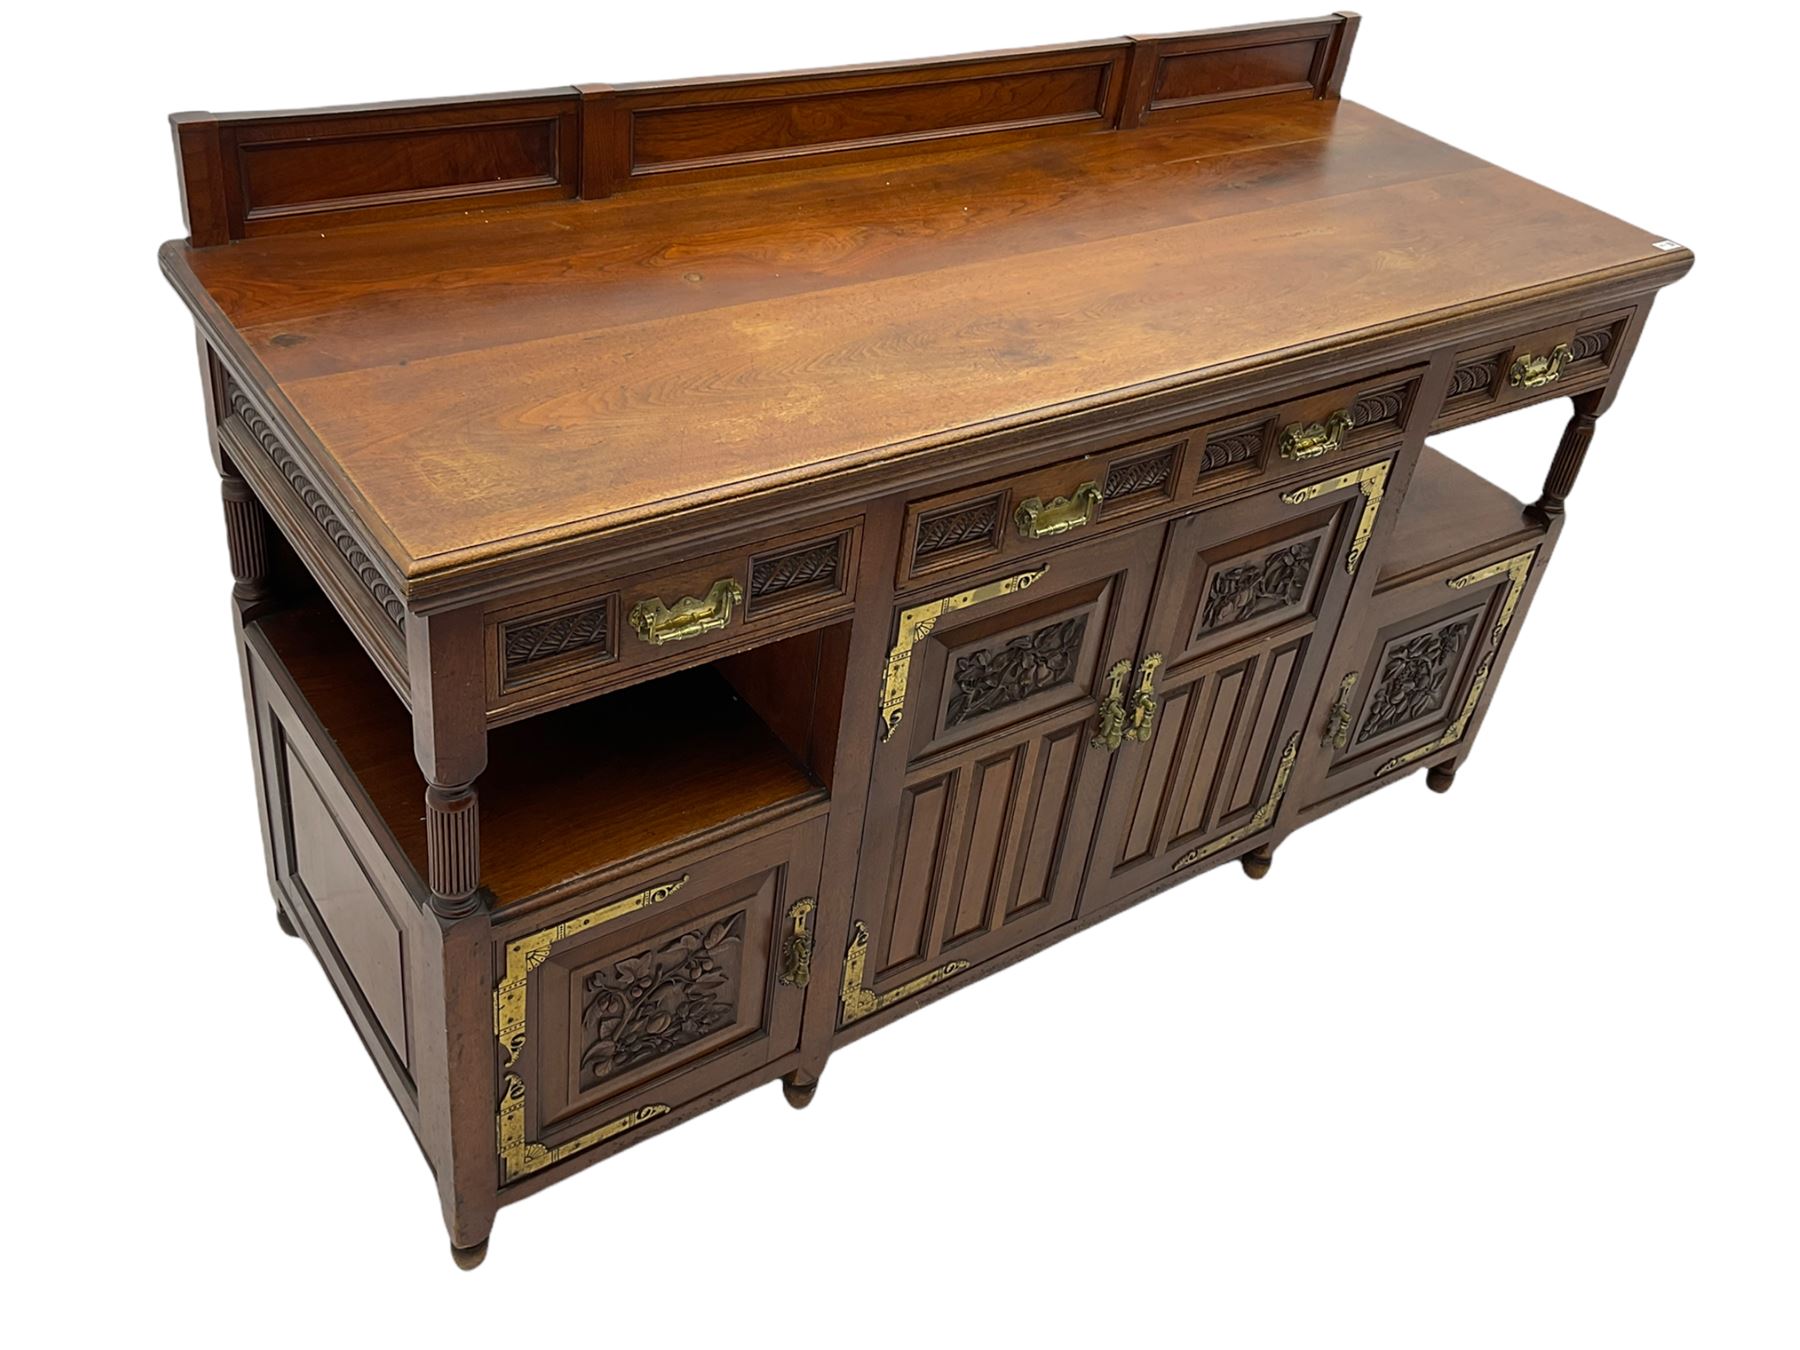 Late 19th century Aesthetic Movement walnut sideboard - Image 5 of 7